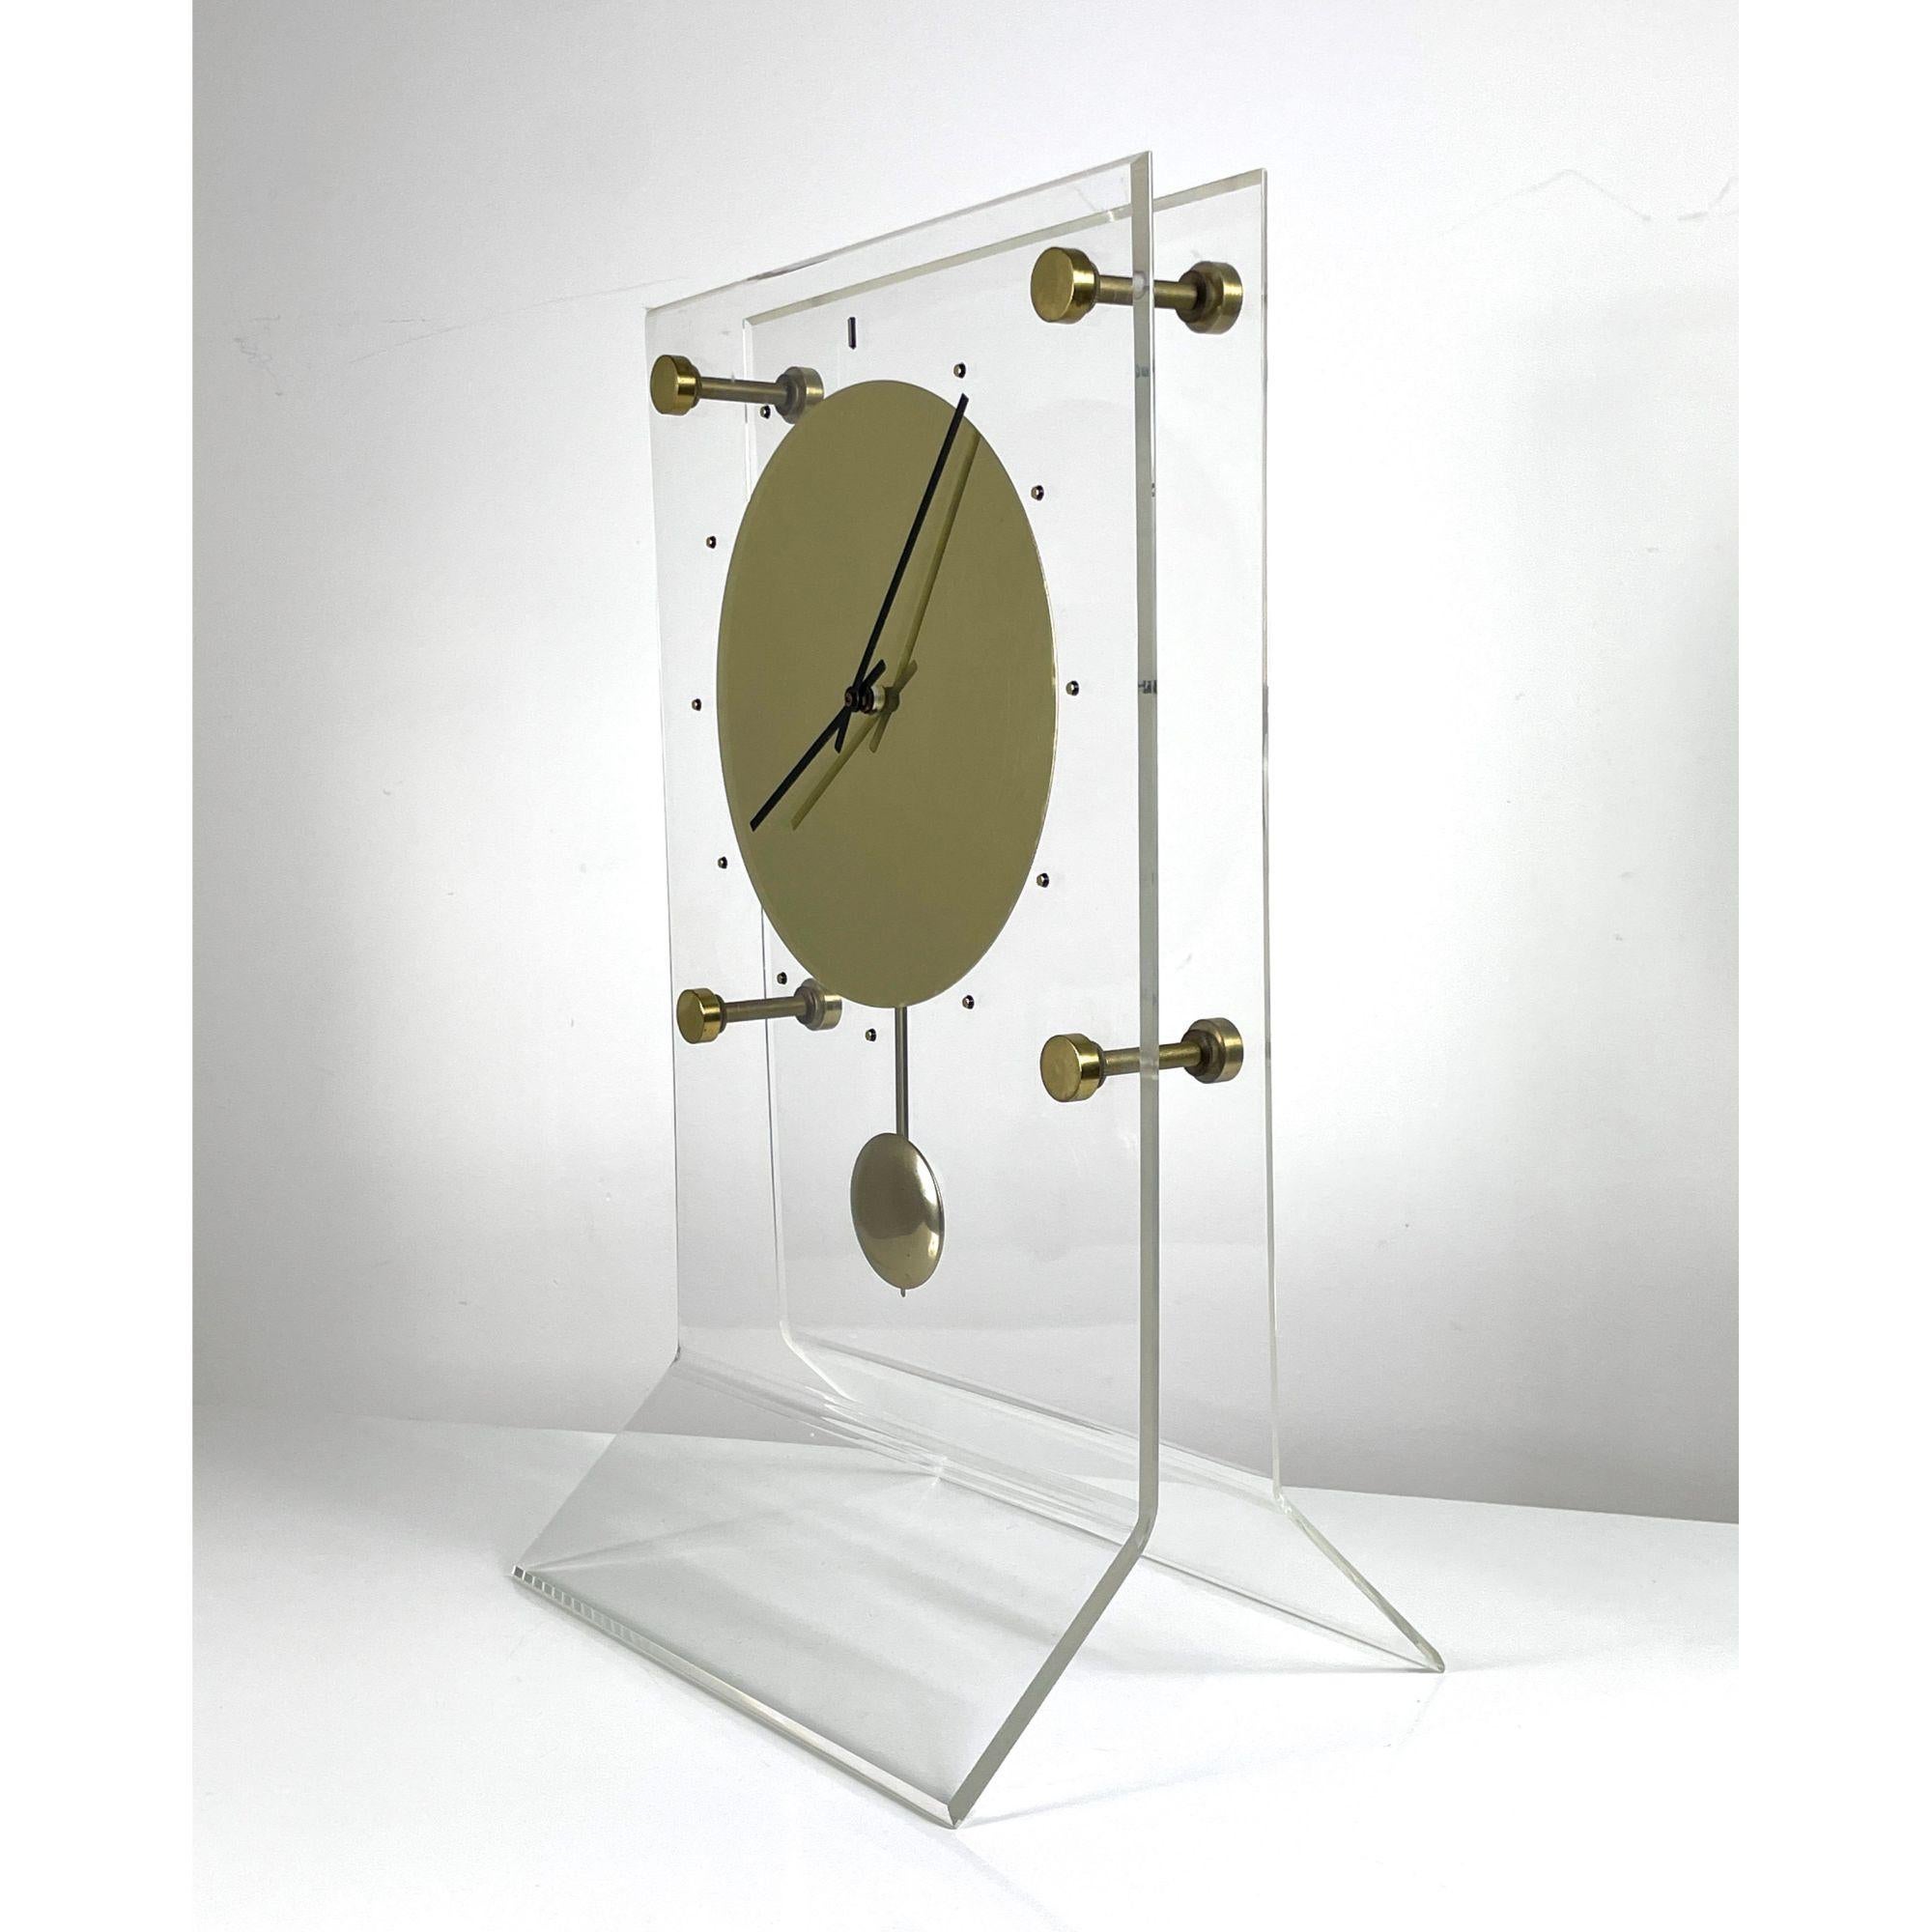 Mid-Century Modern Vintage Large Mid Century Modern Pendulum Mantel Clock in Lucite and Brass 1970s For Sale